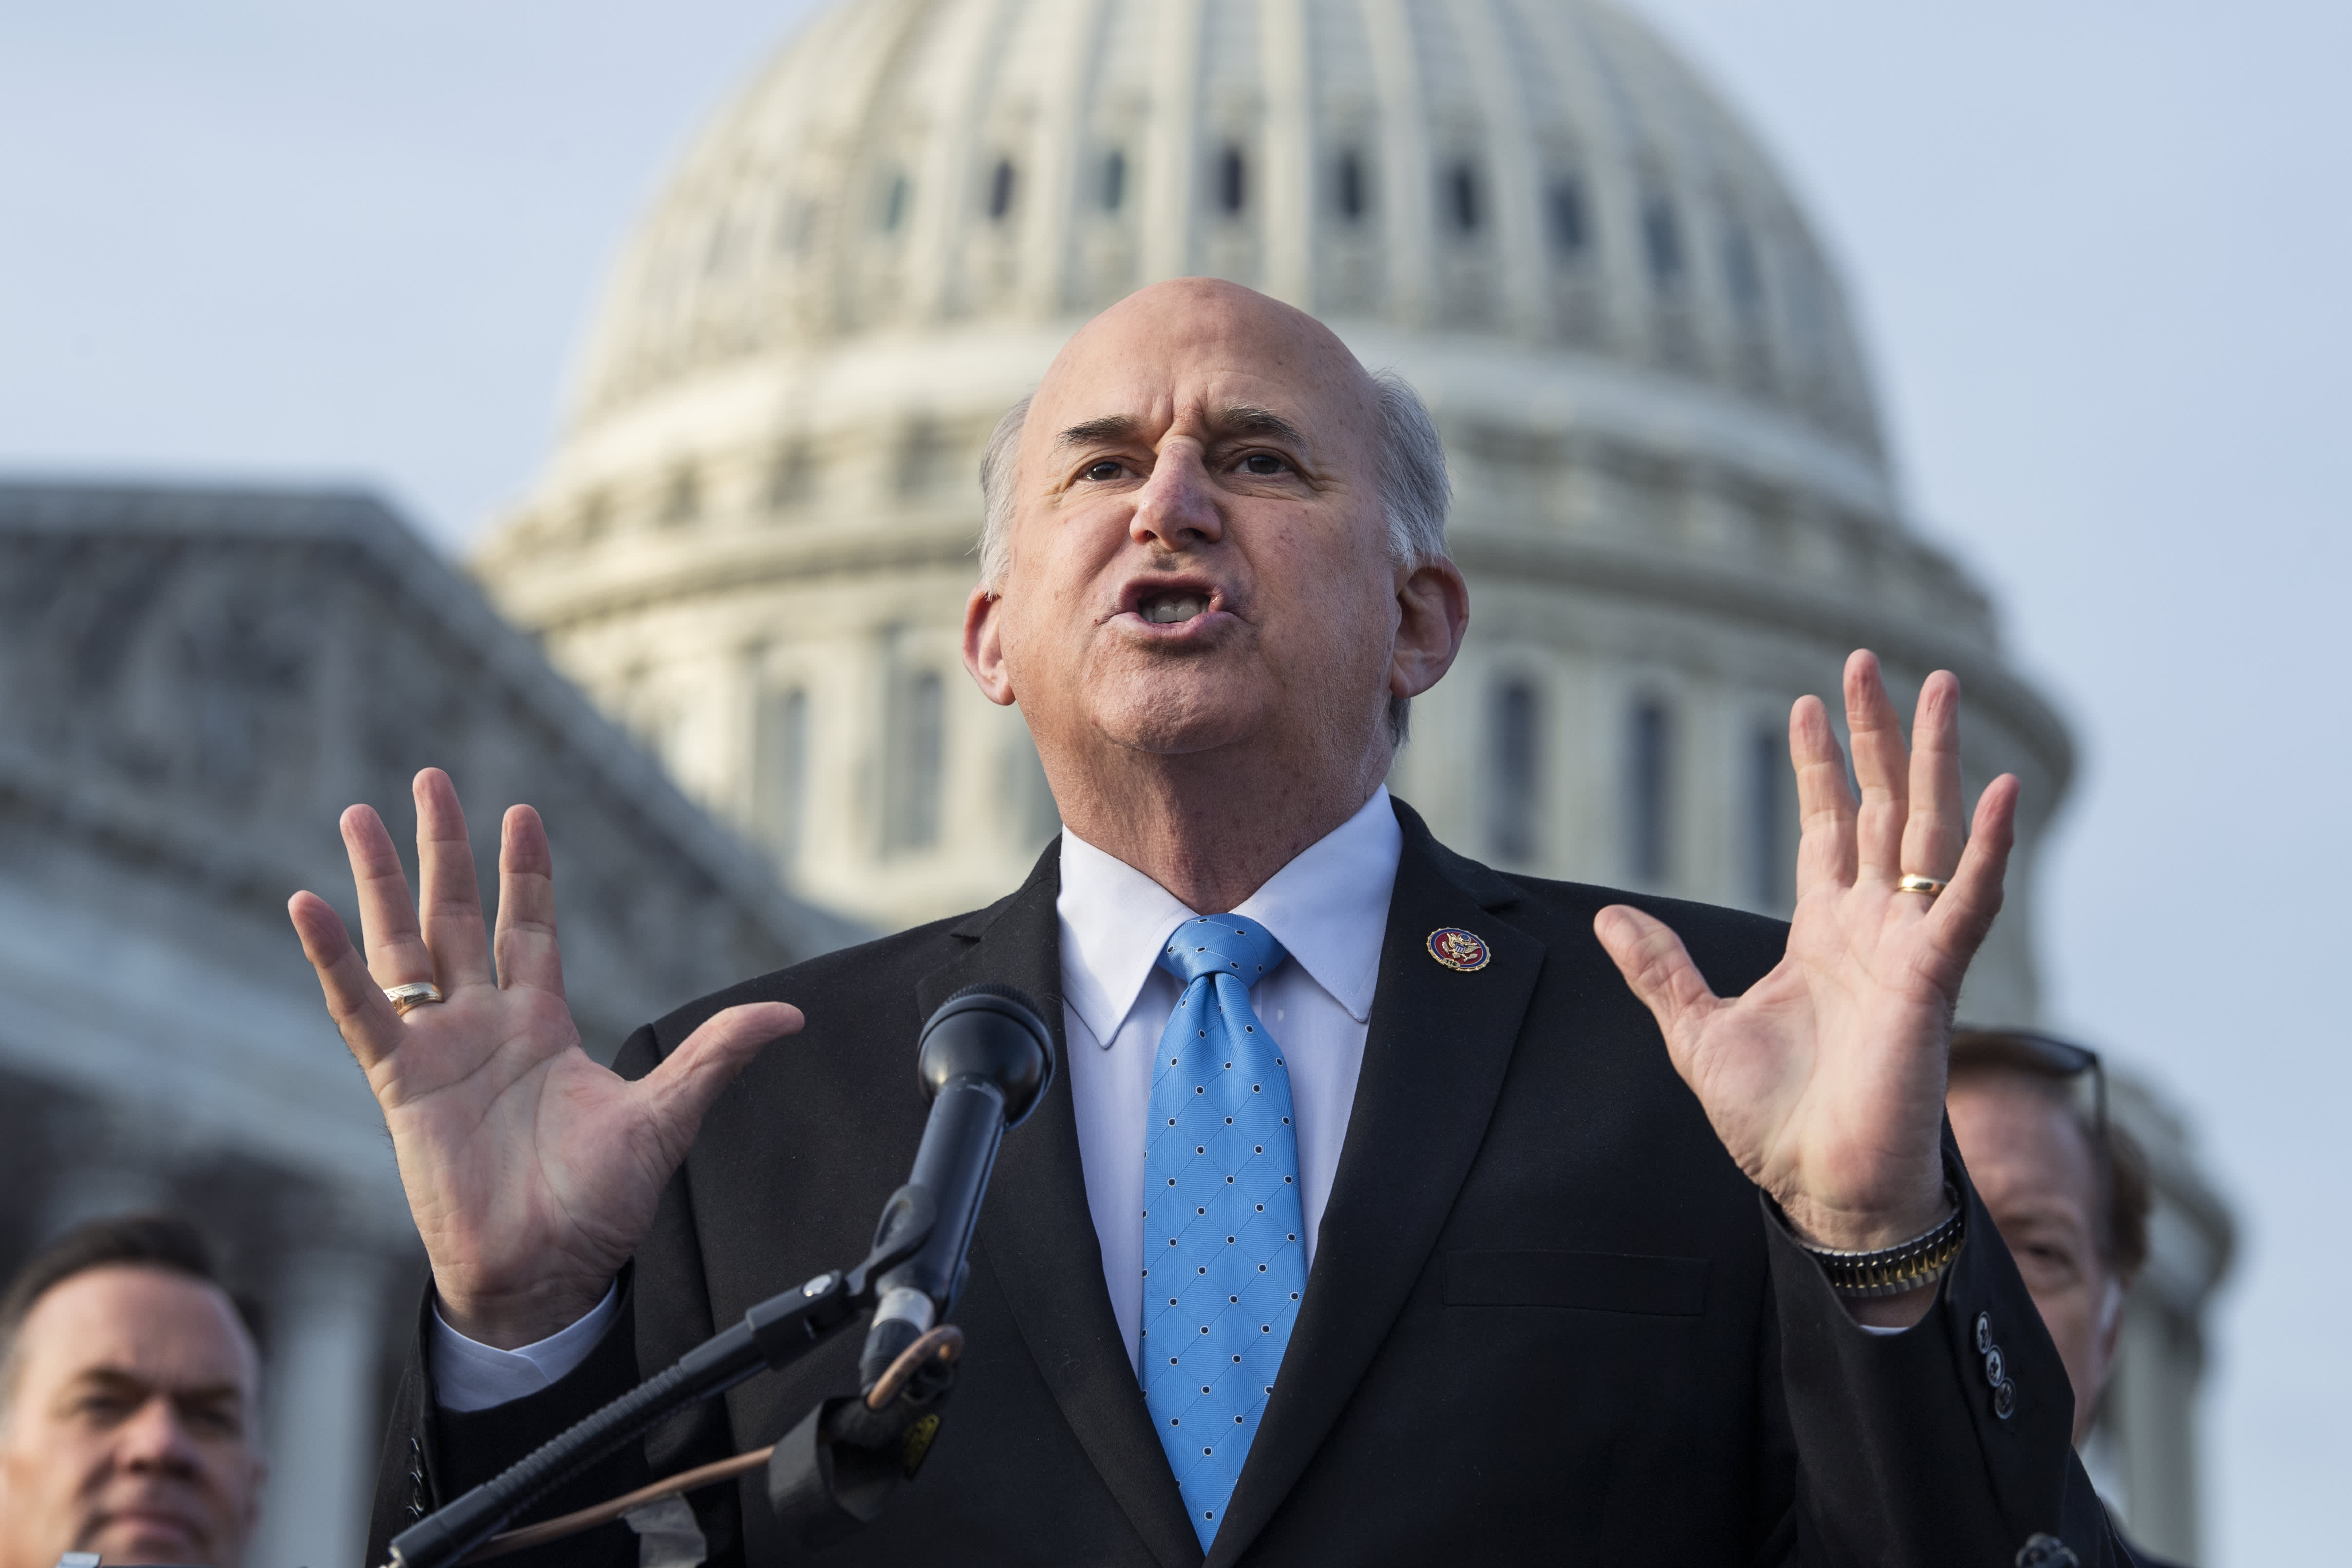 Gohmert and other Republicans sue Pence in last effort to overturn Biden’s victory